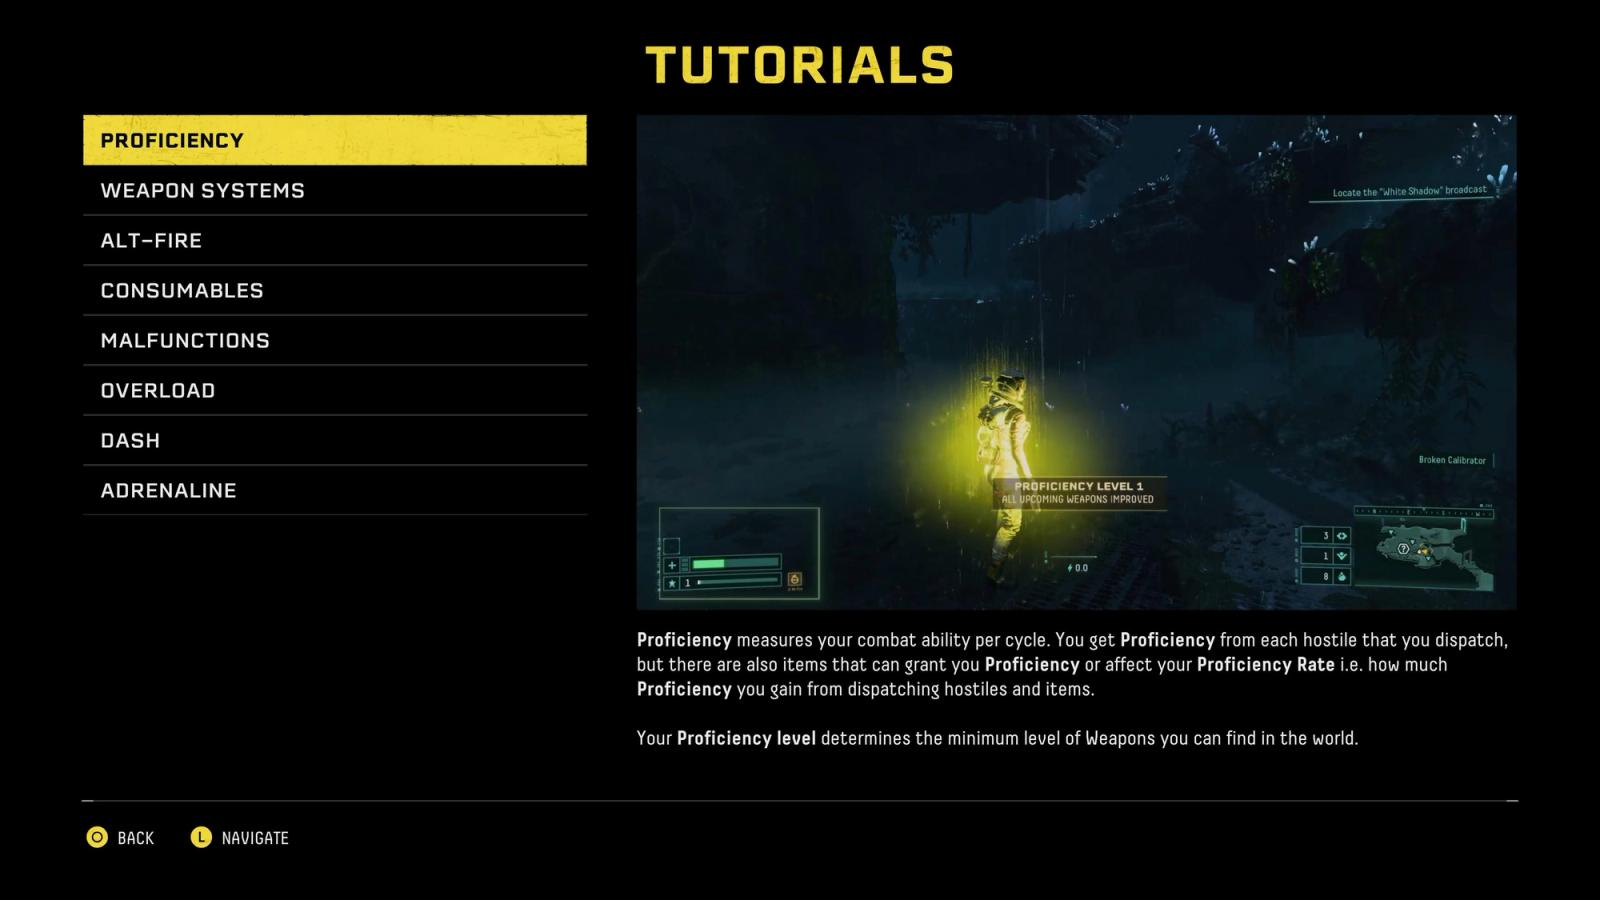 The tutorial menu in Returnal showing the description for the Proficiency attribute